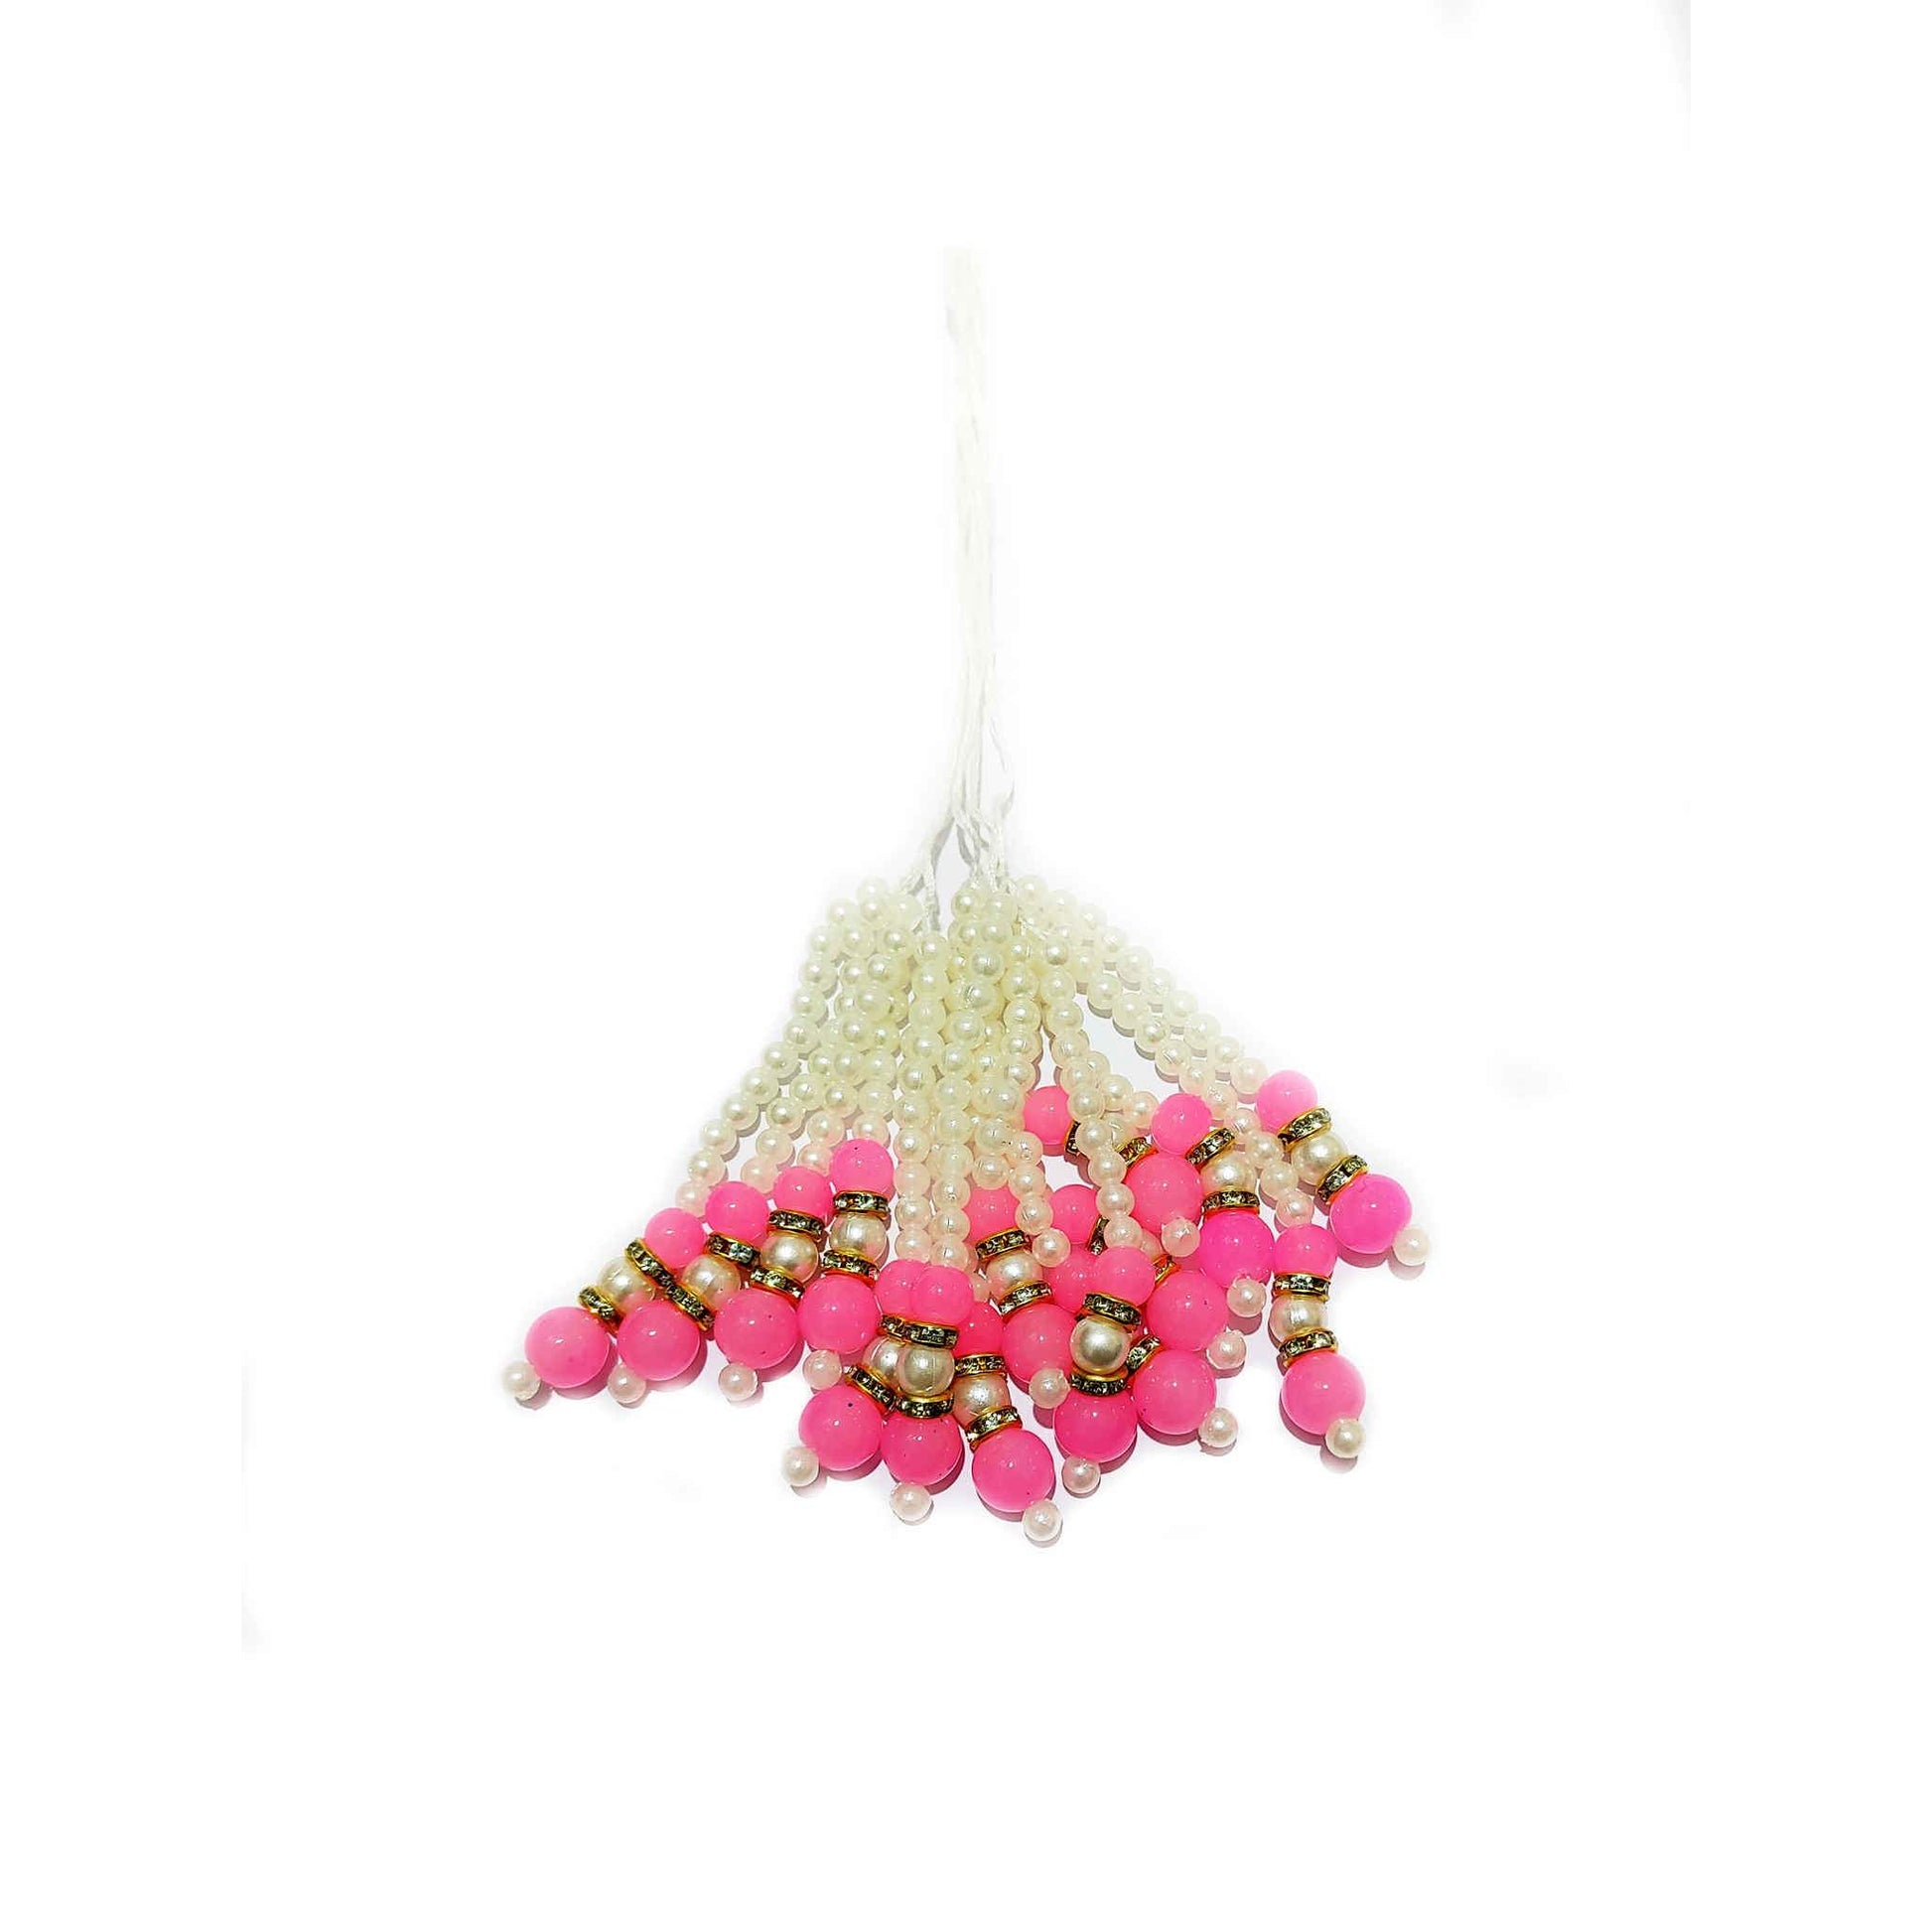 Indian Petals Pearl Beads Handmade DIY Craft, Jewelry Fringe Tassel with Big Pink Beads and Diamond Ring - Design 831, Hot Pink